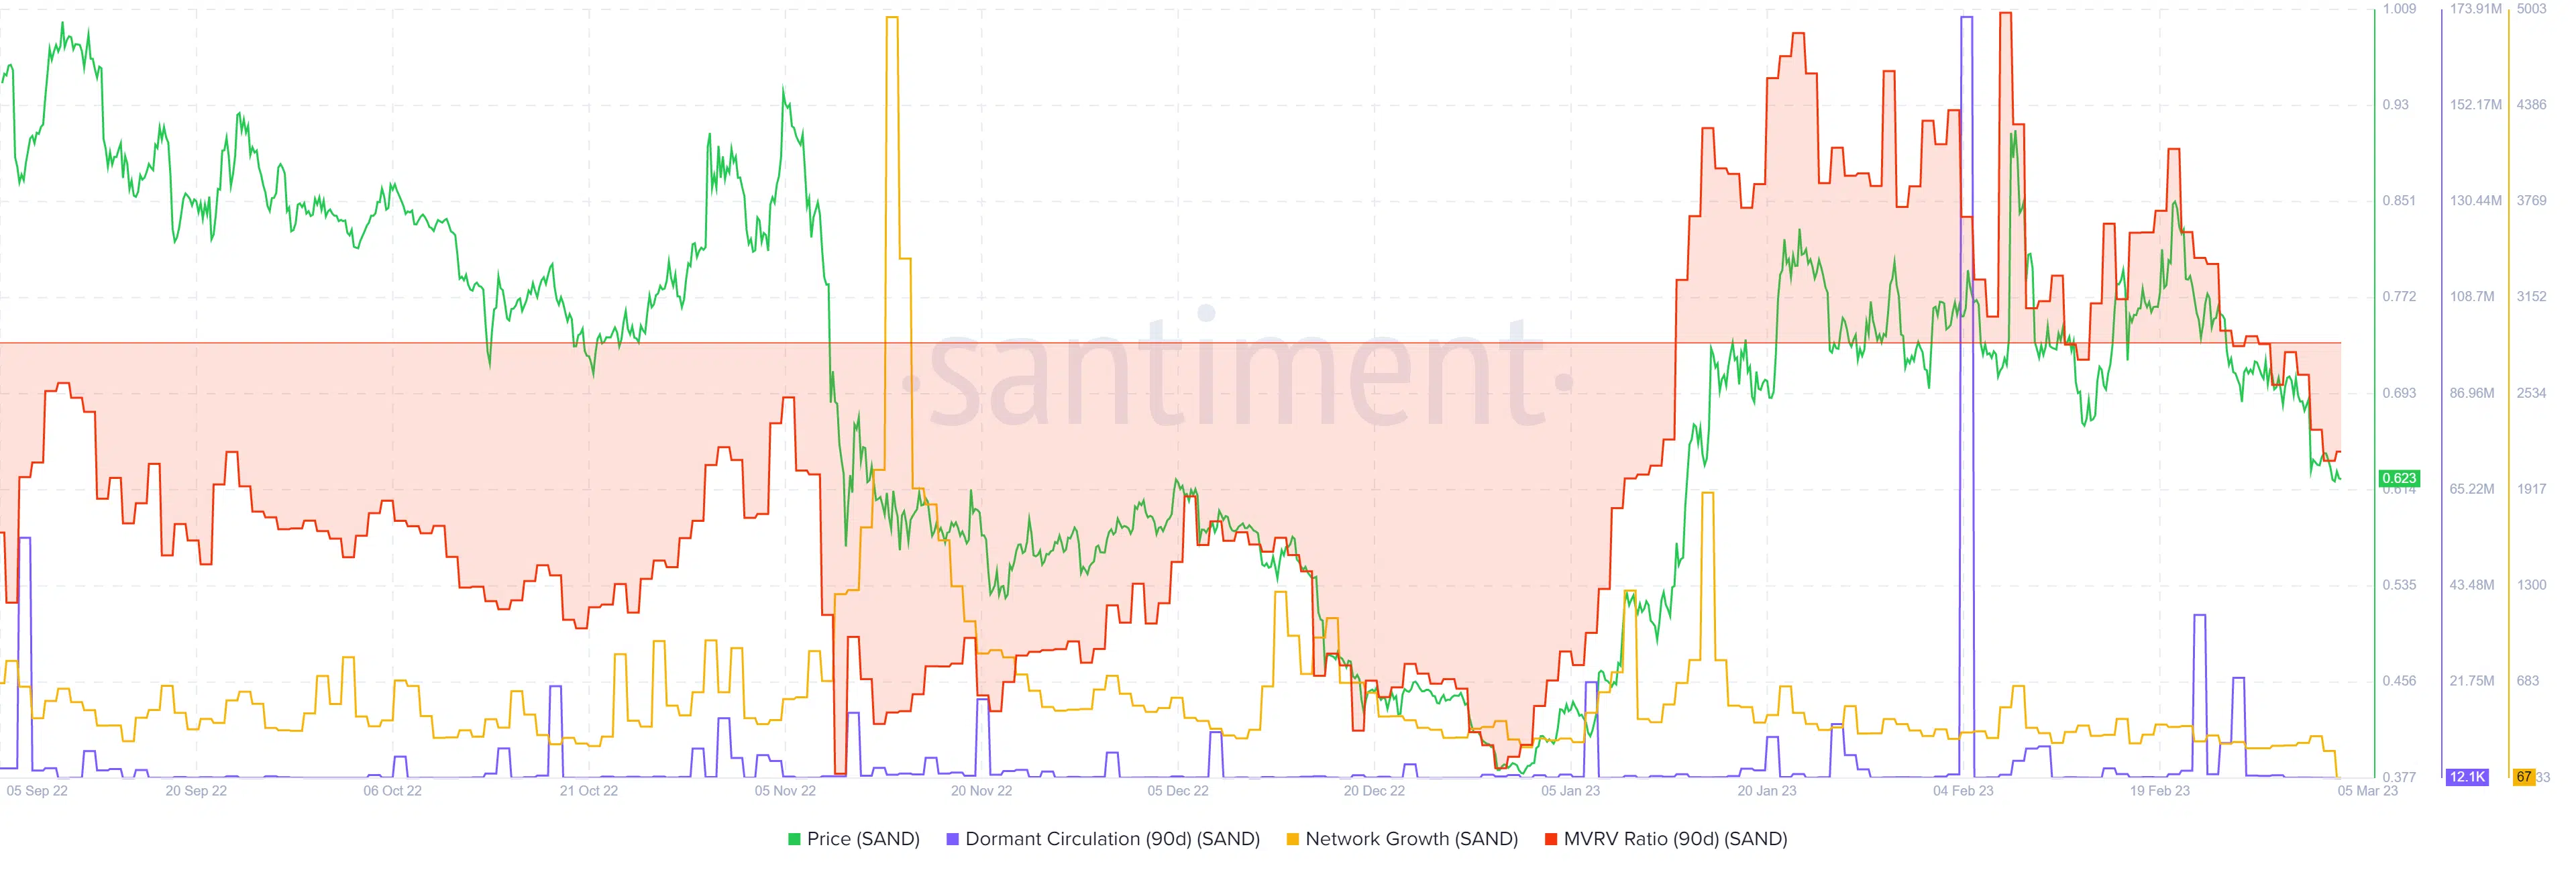 The Sandbox price charts show where another wave of selling could occur